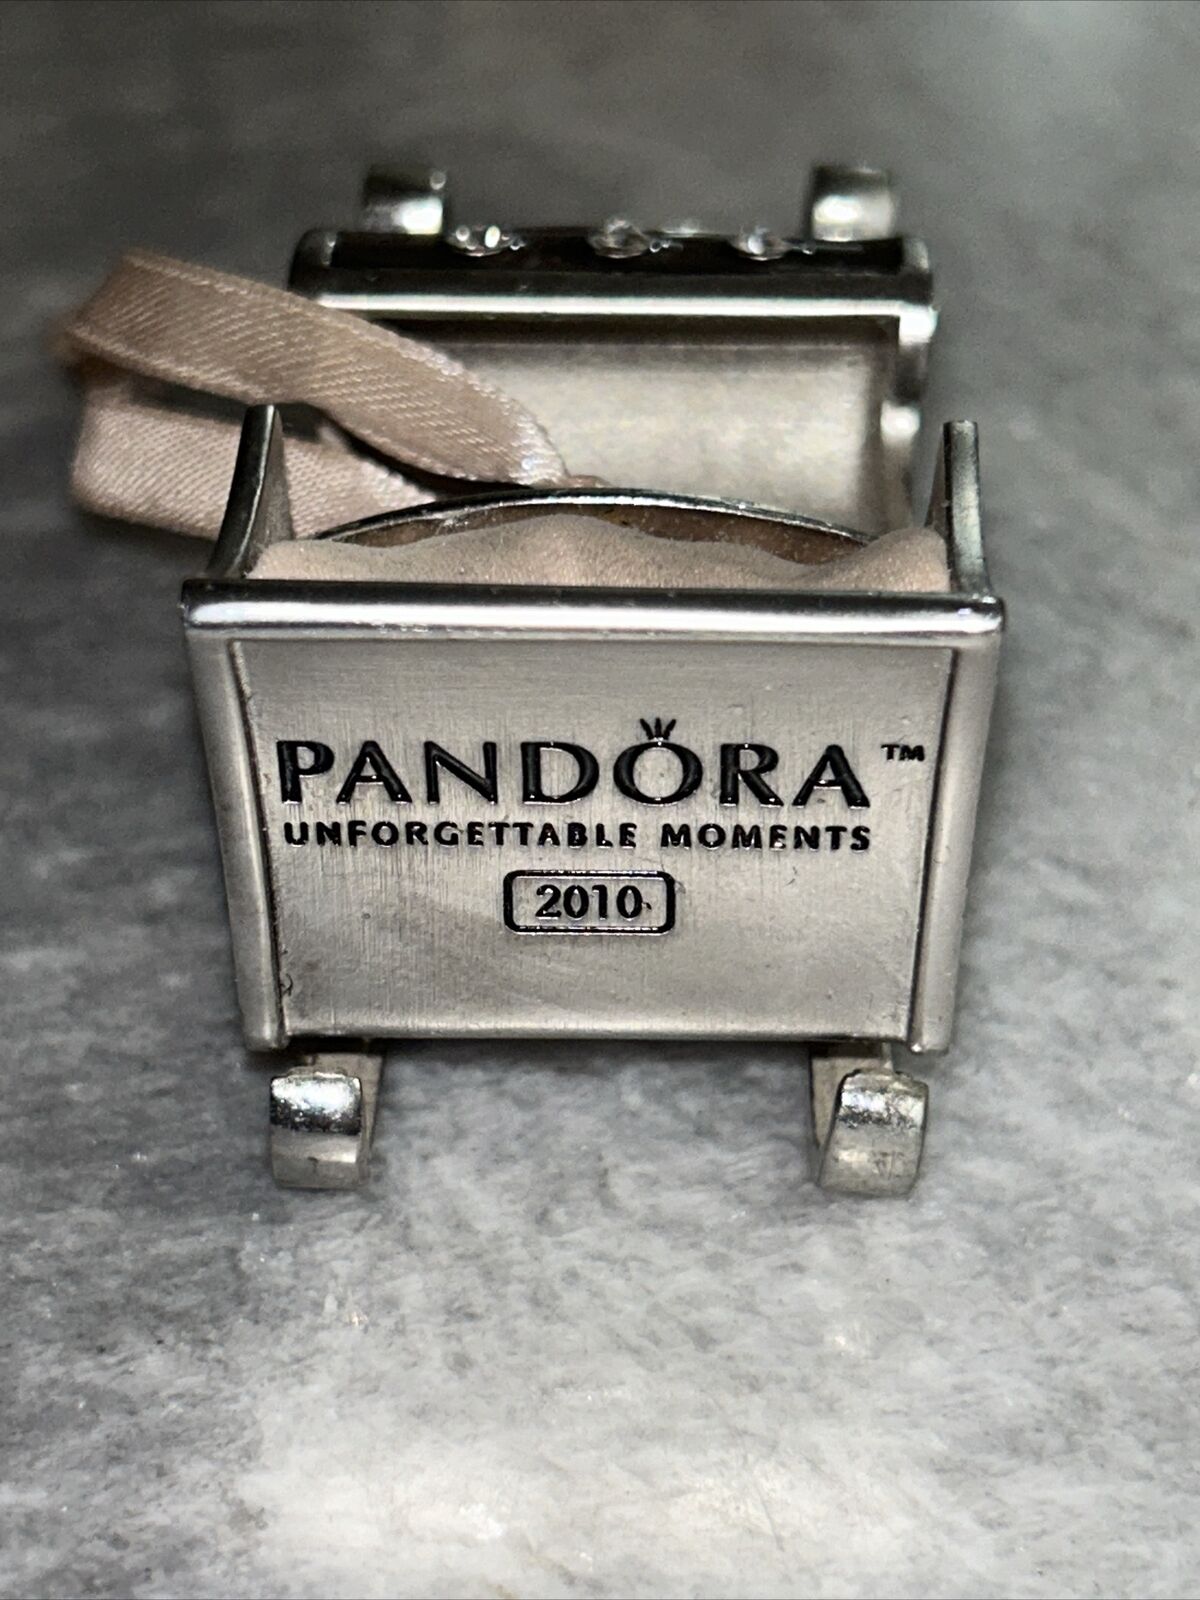 Pandora 2010 Sleigh Christmas Ornament Unforgettable Moments 3rd in Series